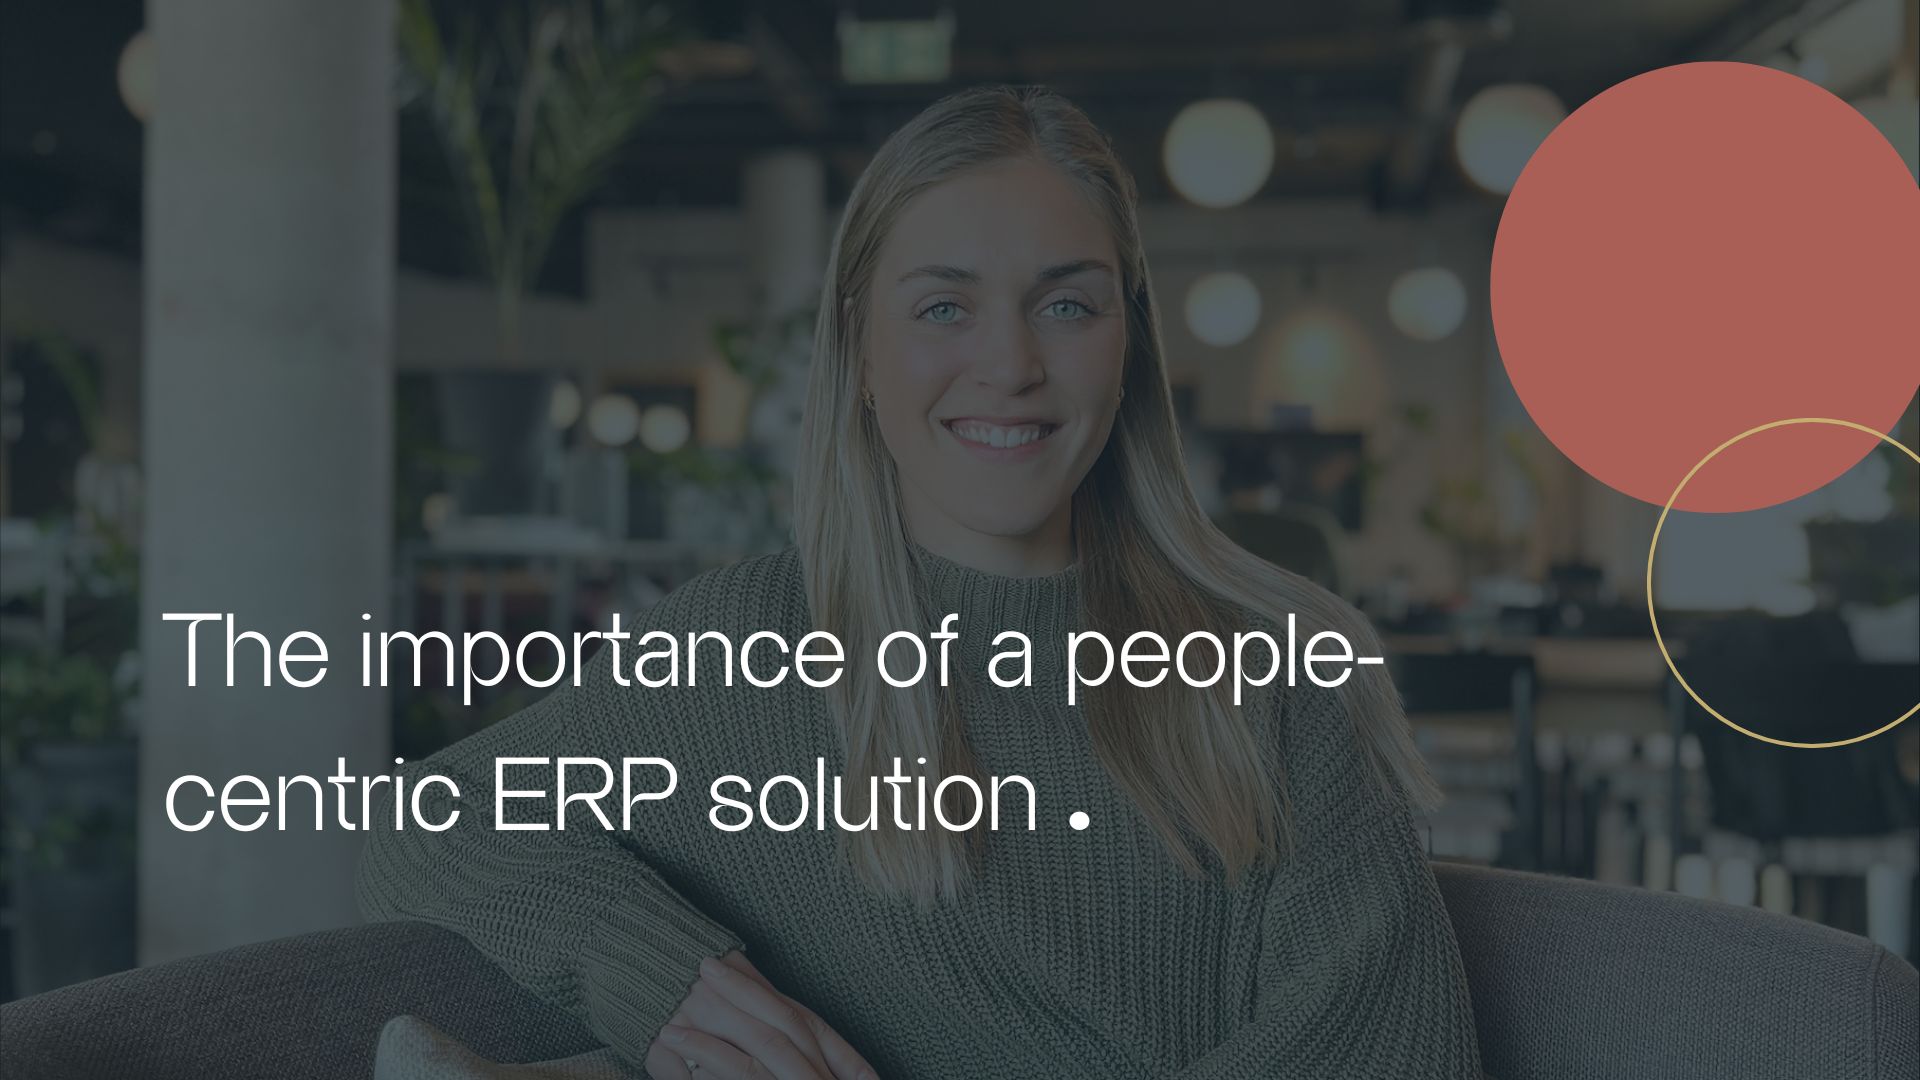 People-centric ERP solutions